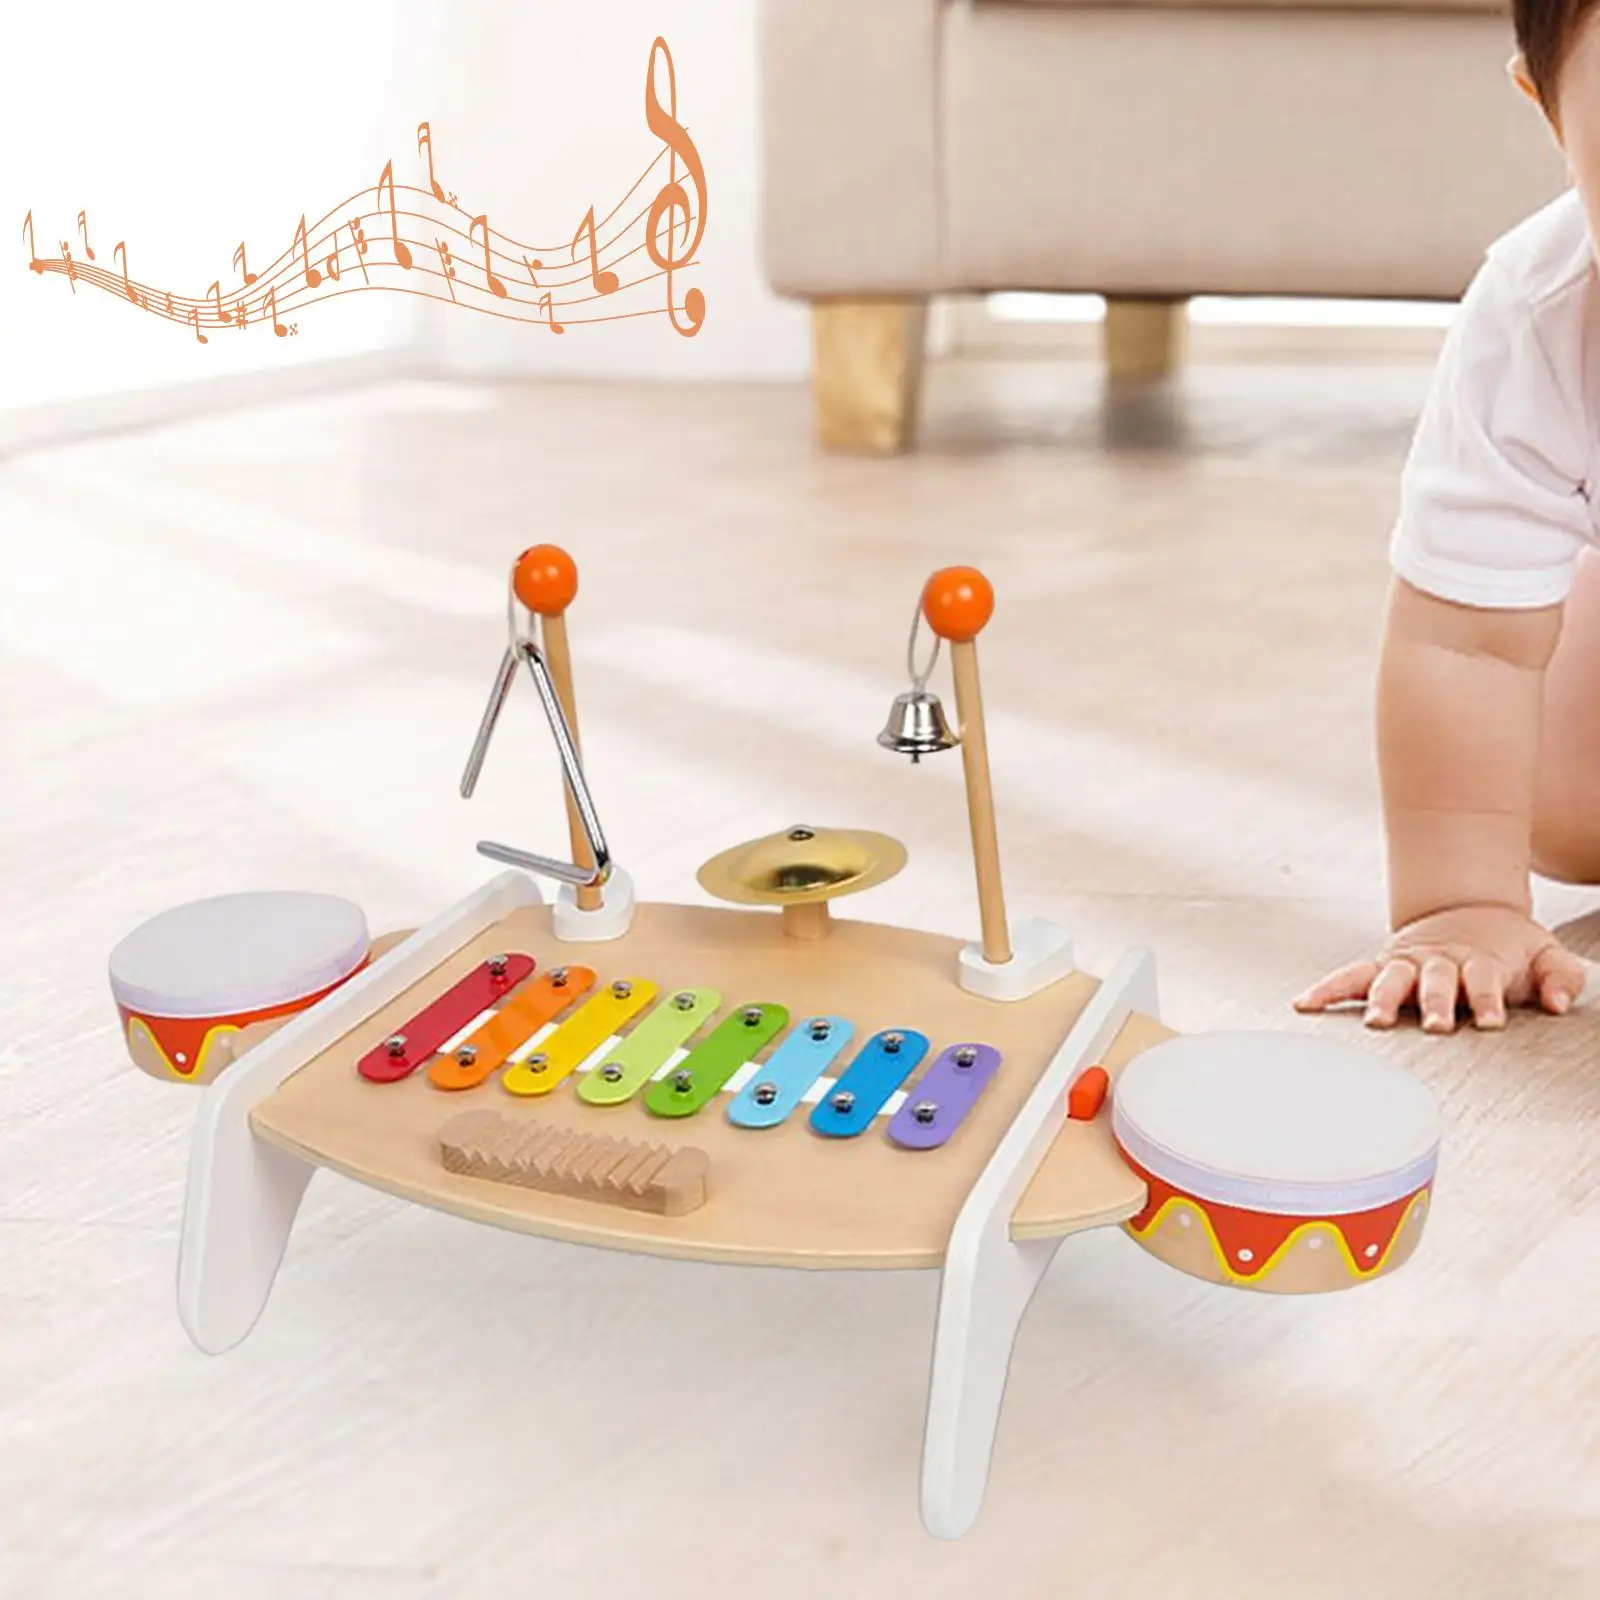 Portable Xylophone Toy Wooden Percussion Toy Sensory Musical Toy for Beginner Children Boys Girls Gift